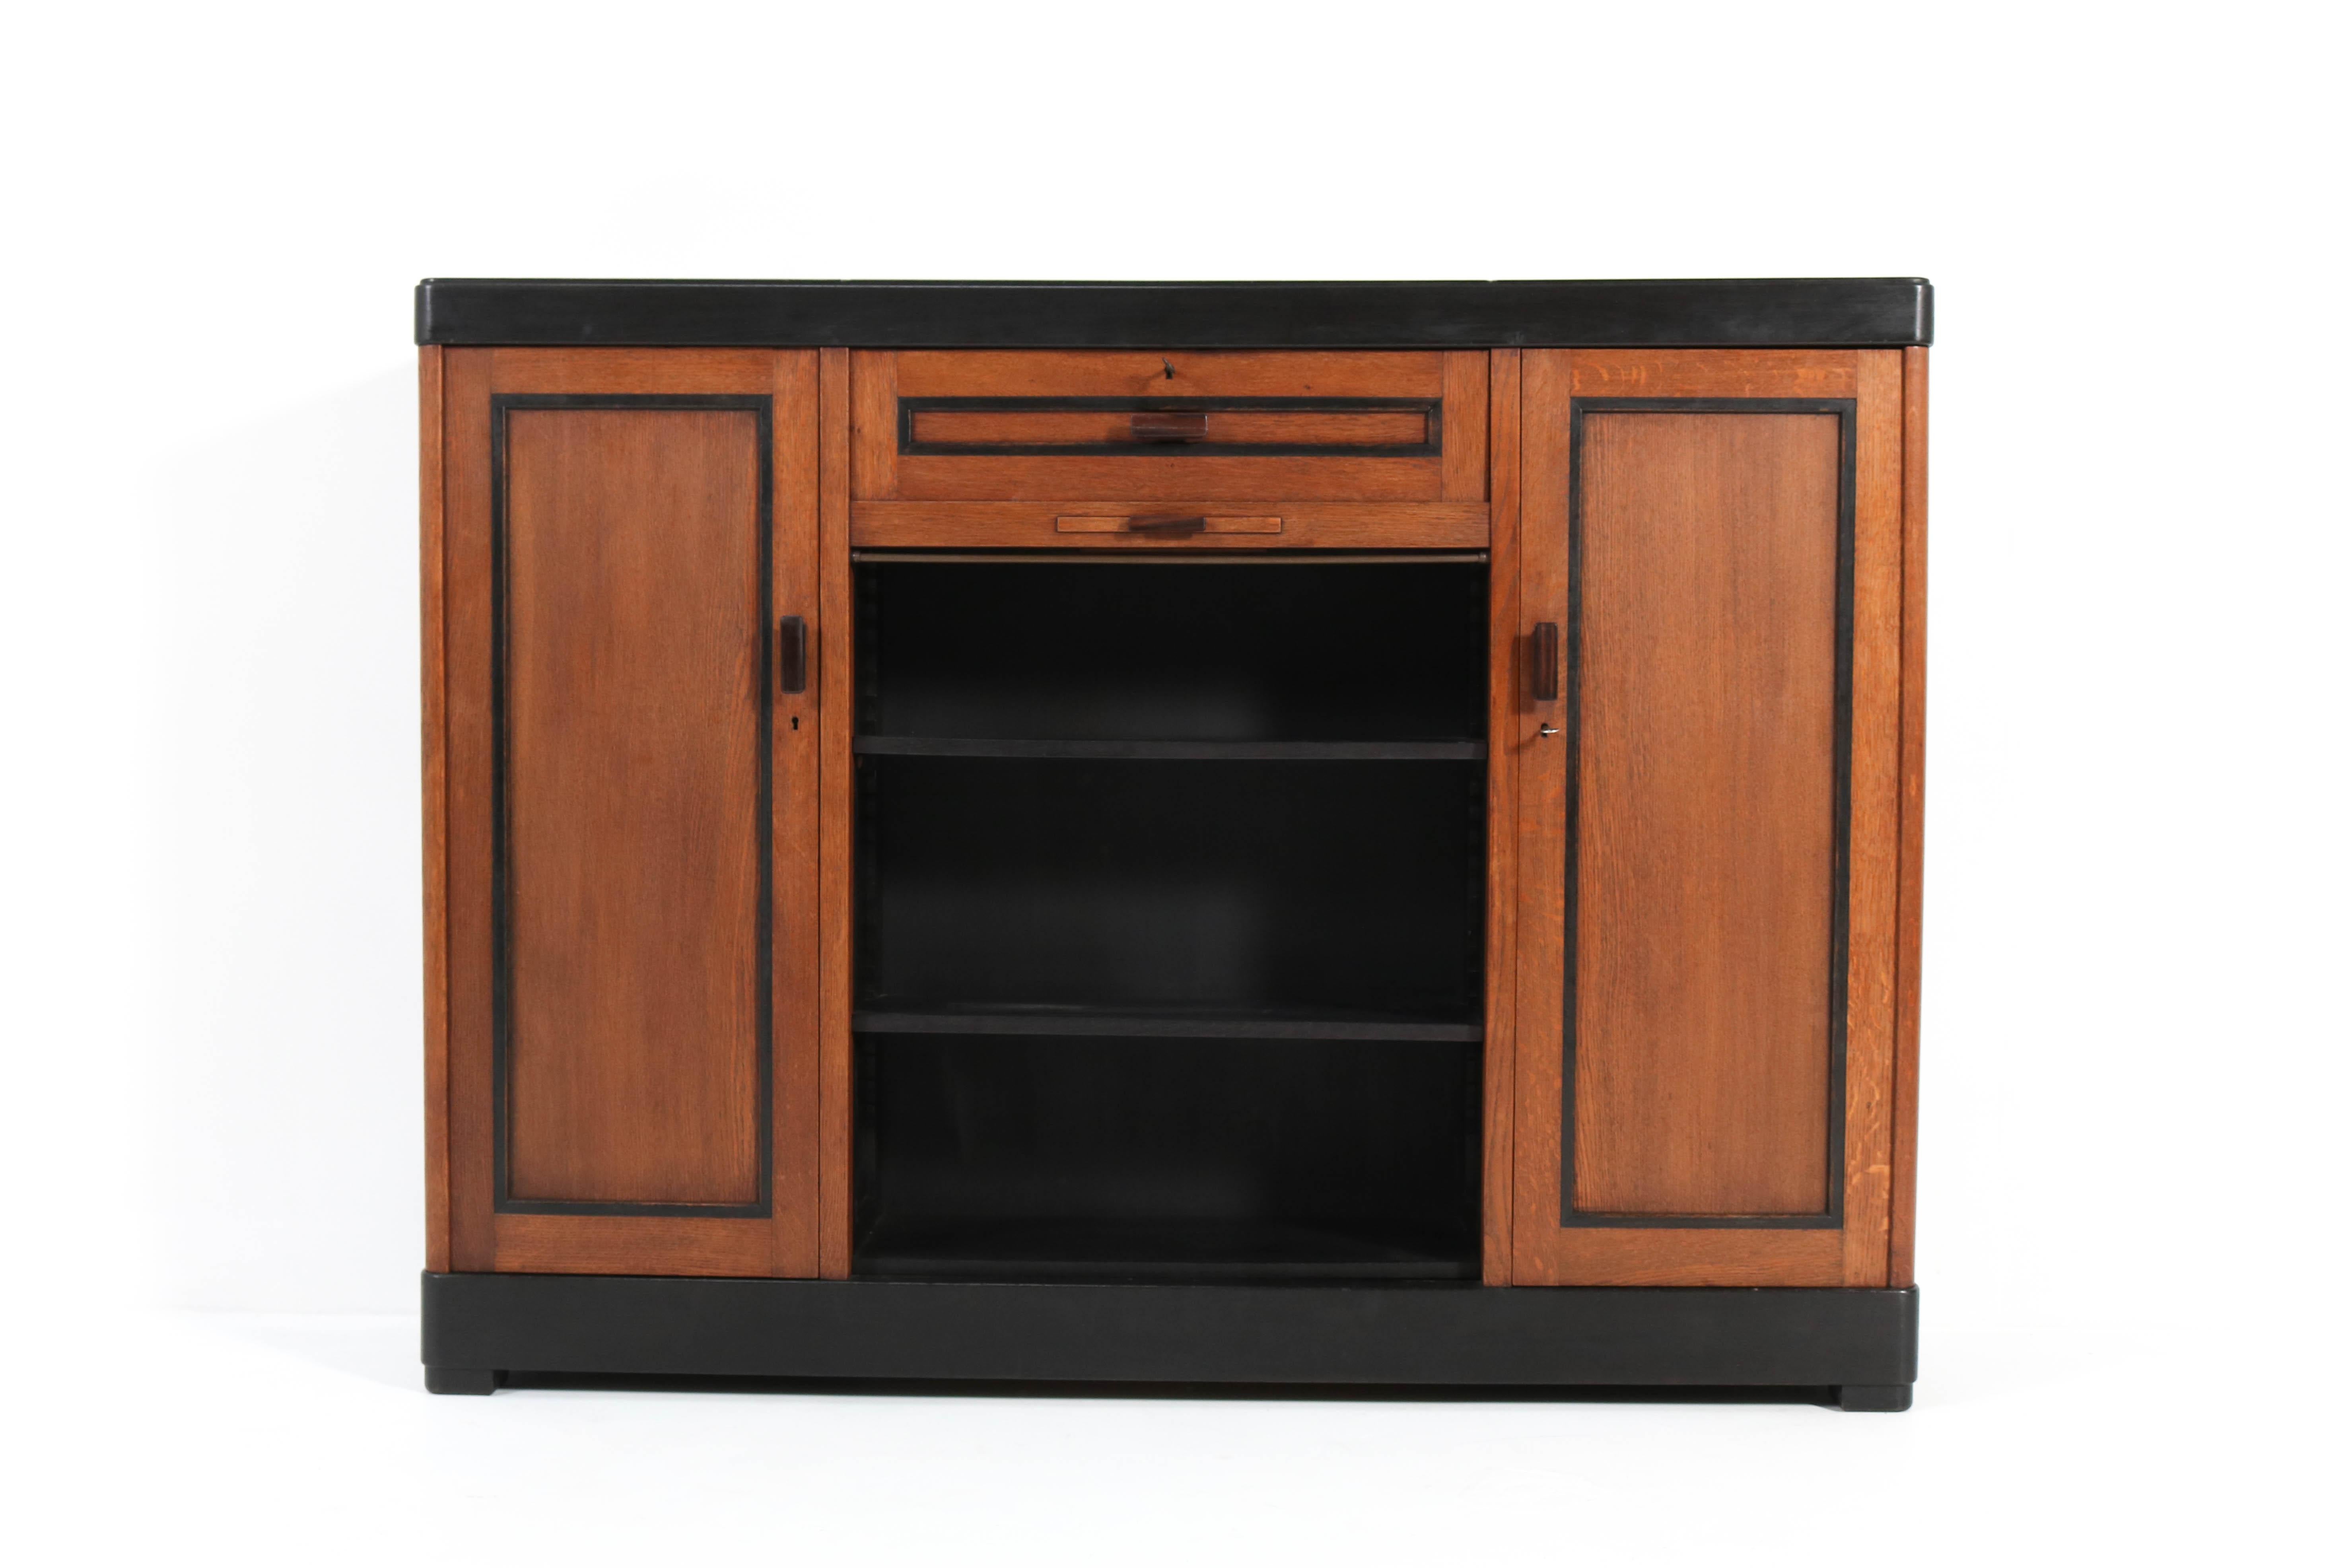 Magnificent and rare Art Deco Haagse School bookcase.
Design by Frits Spanjaard for L.O.V. Oosterbeek.
Striking Dutch design from the twenties.
Solid oak with original Macassar ebony handles and original black lacquered 
lining.
Marked with